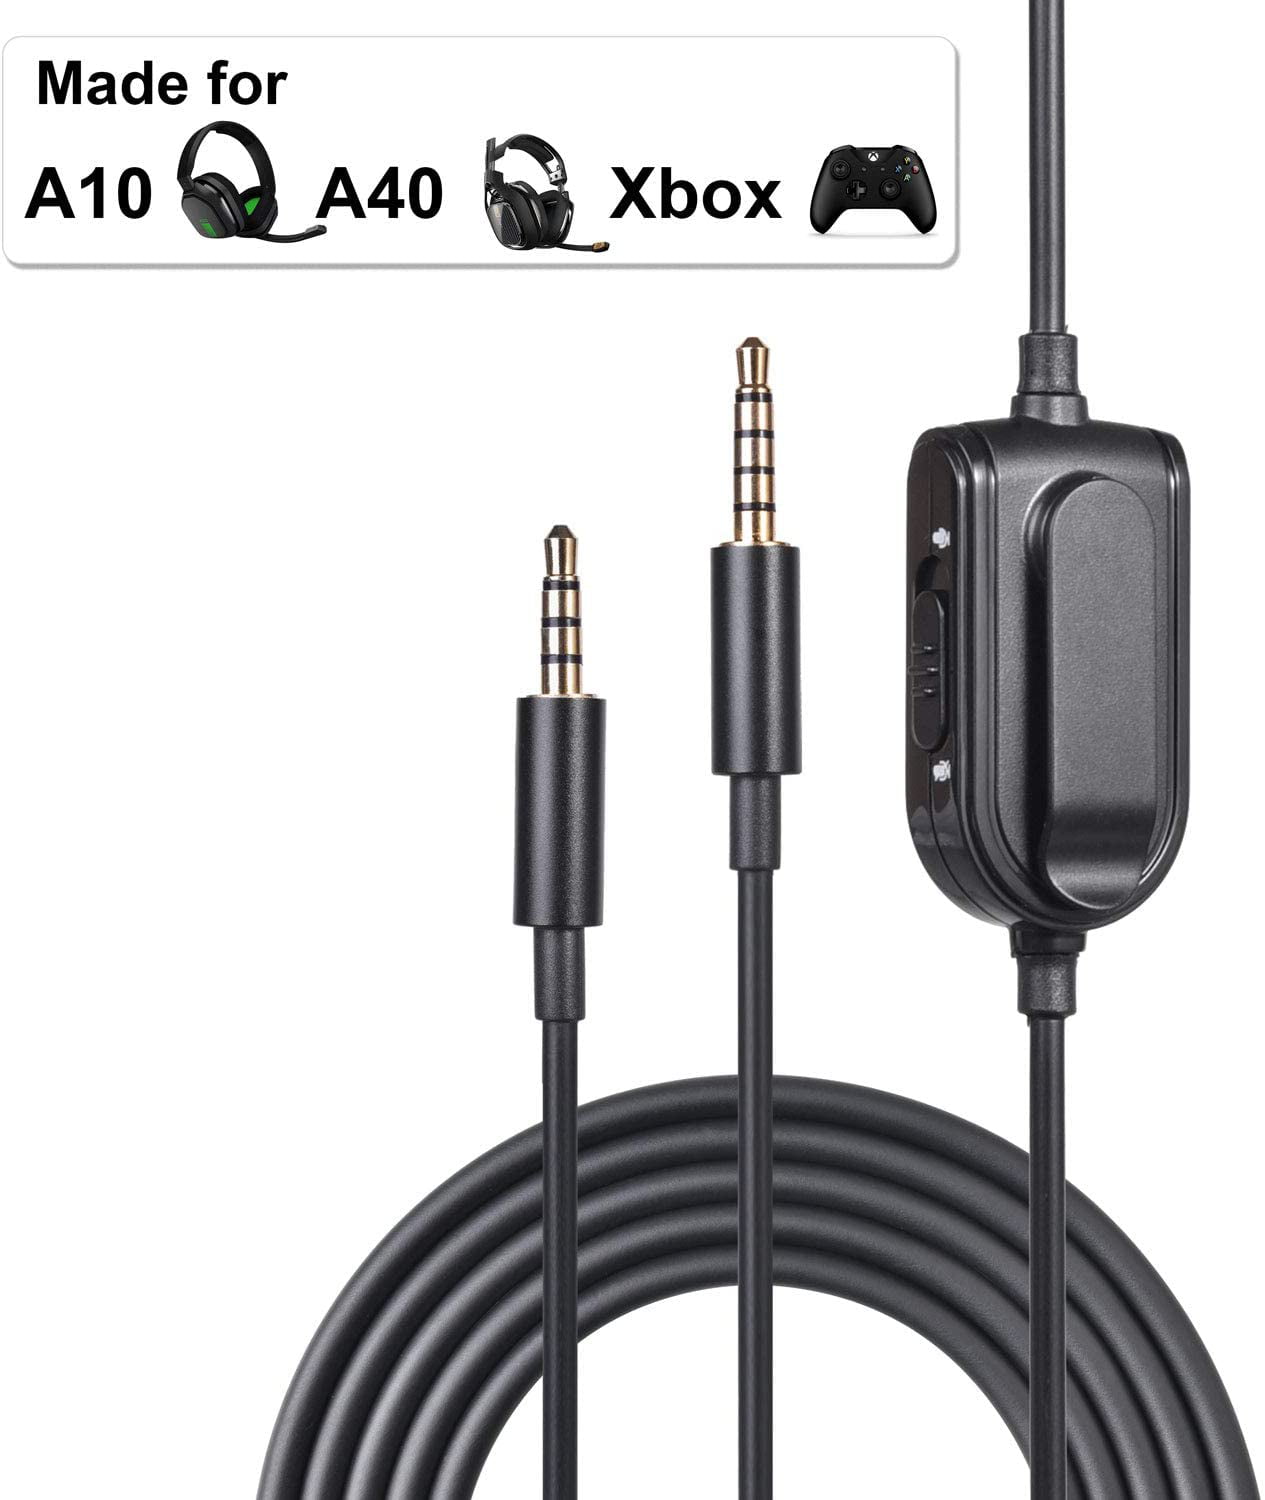 Practical 3.5mm Gold-plated Plug Professional For Audio Wire for Head-mounted Gaming Headset for A10 A40 A30 A50 Cable